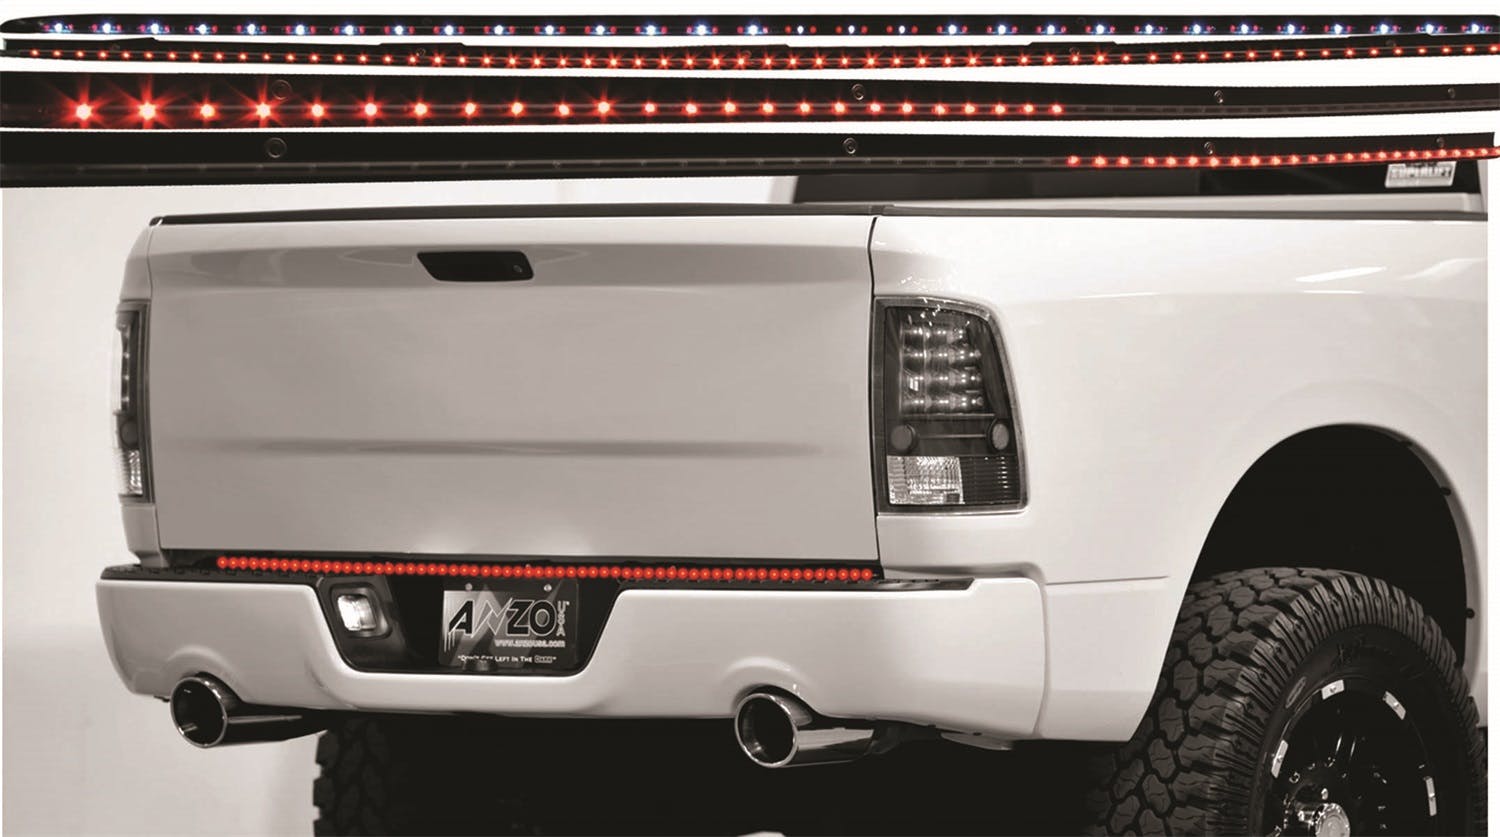 AnzoUSA 531044 LED Tailgate Bar without Reverse, 49" 4 Function